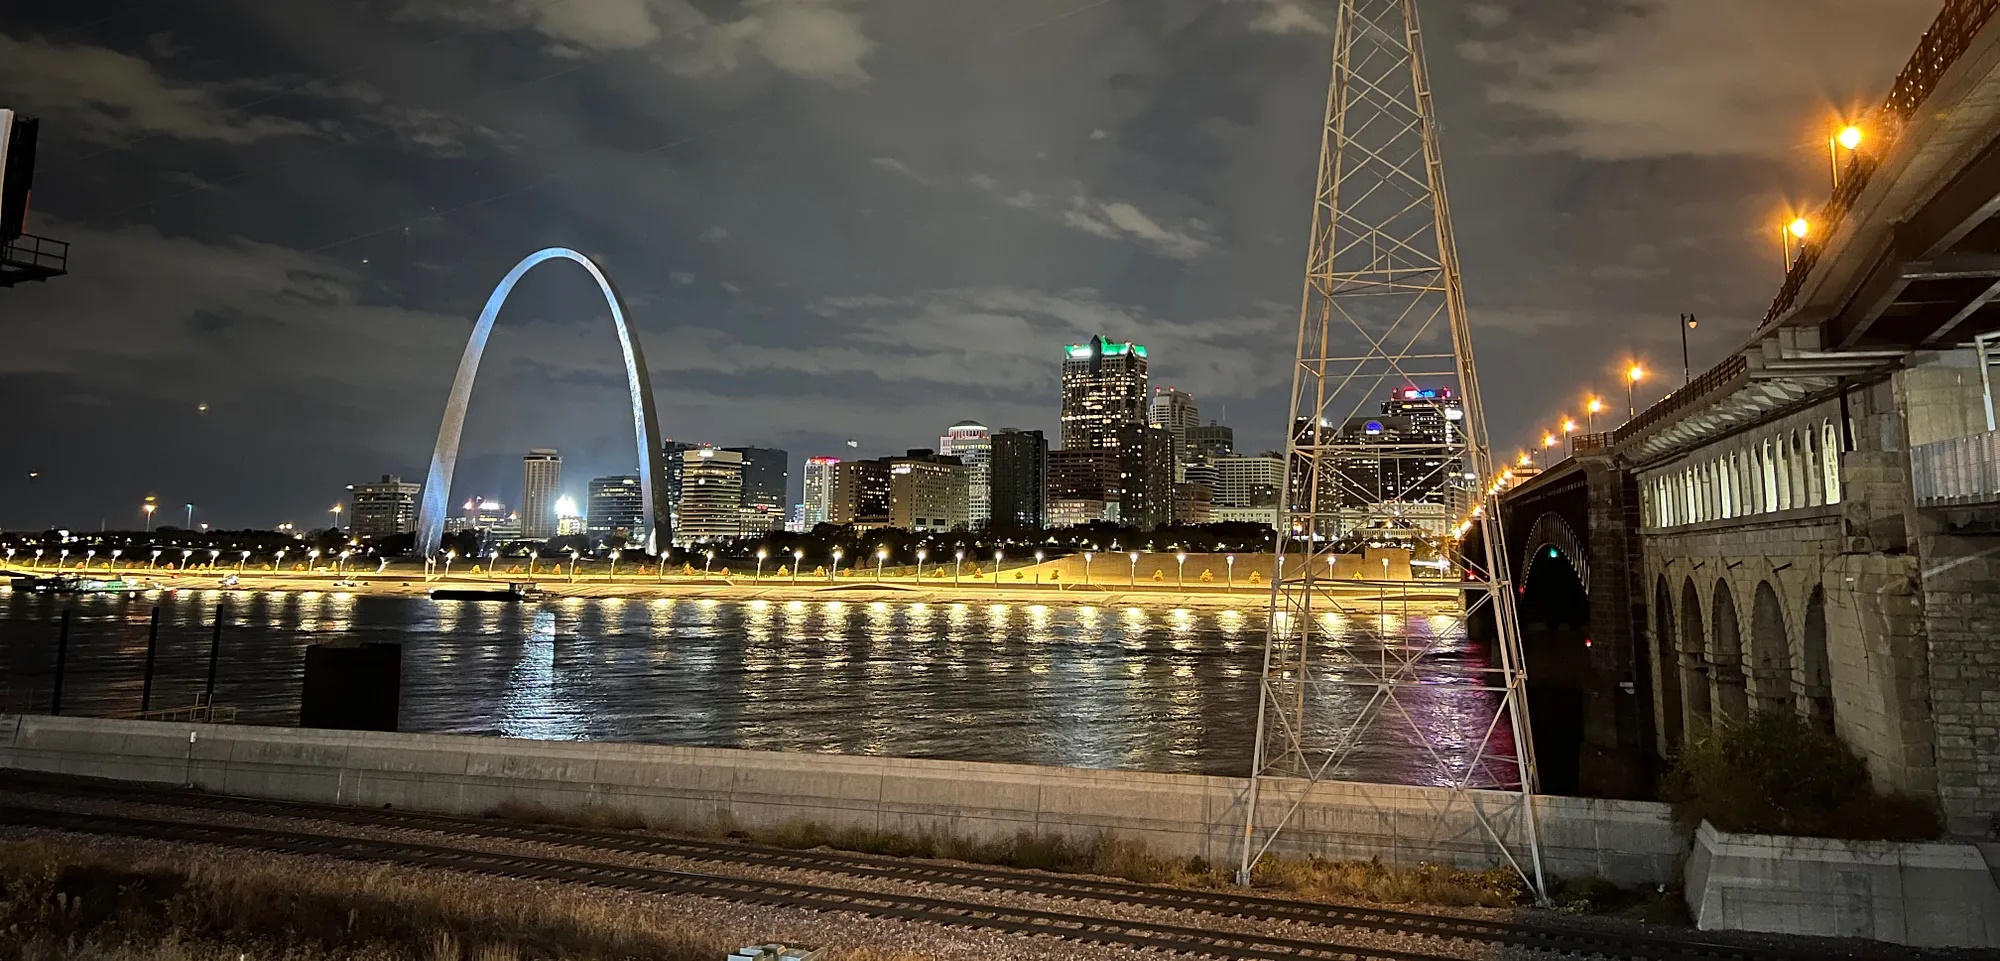 A view of St. Louis and the Gateway Arch from across the Mississippi river